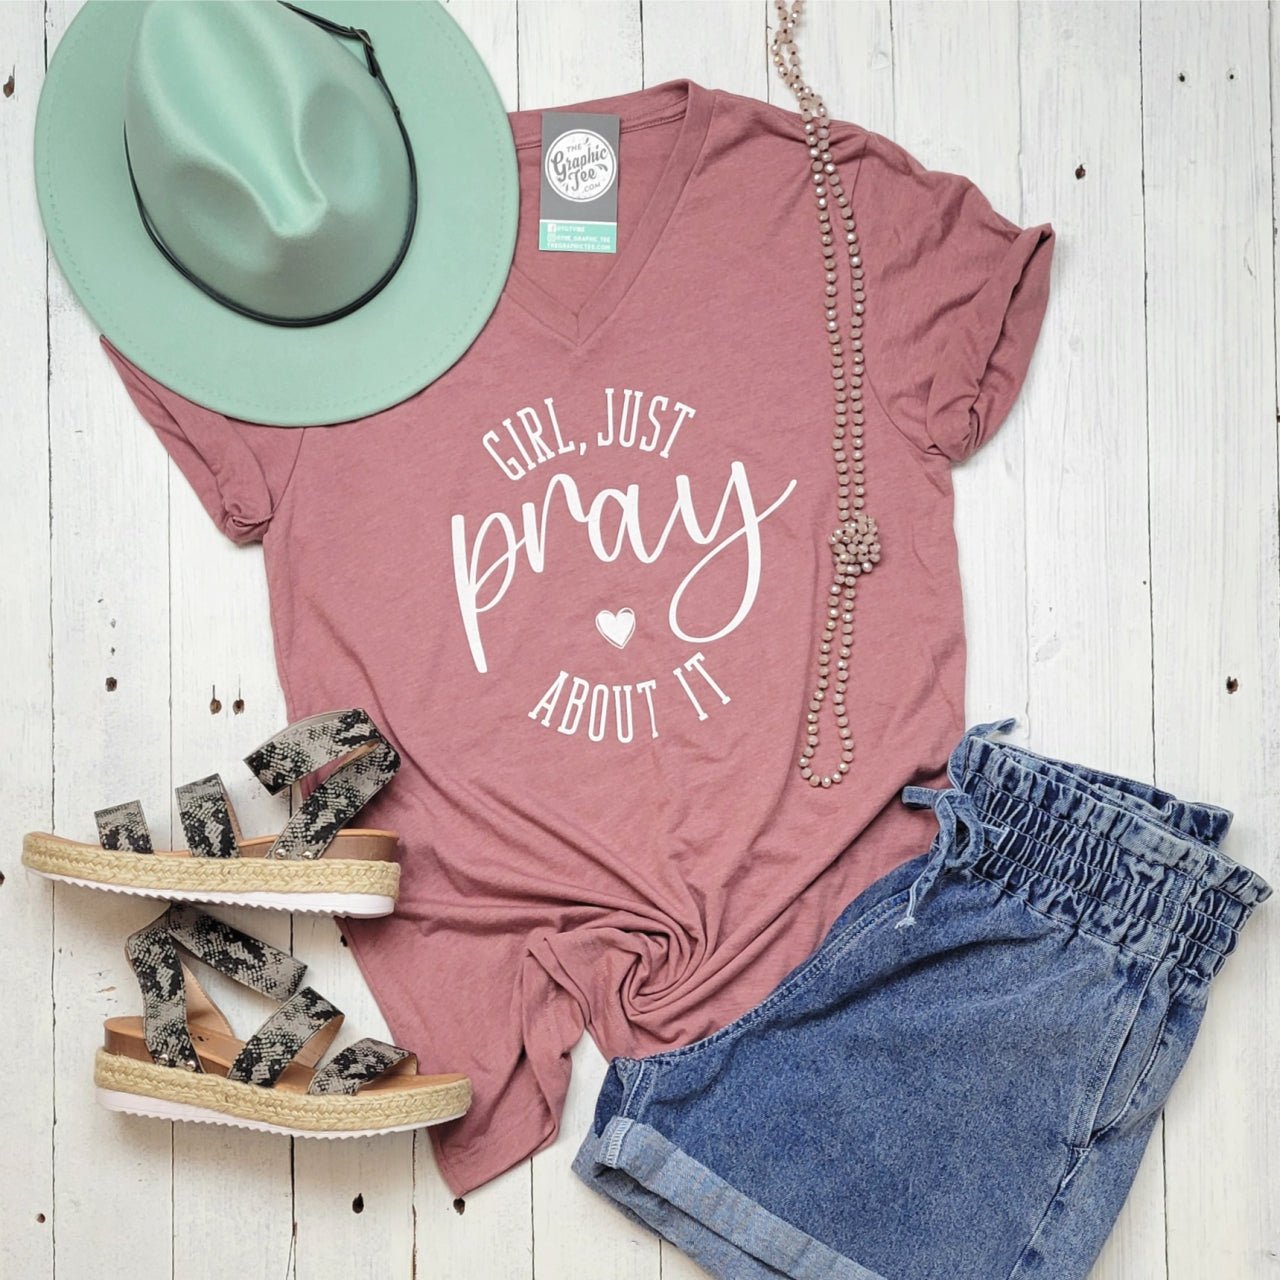 Girl Just Pray About It Heather Mauve Unisex V Neck Tee - The Graphic Tee